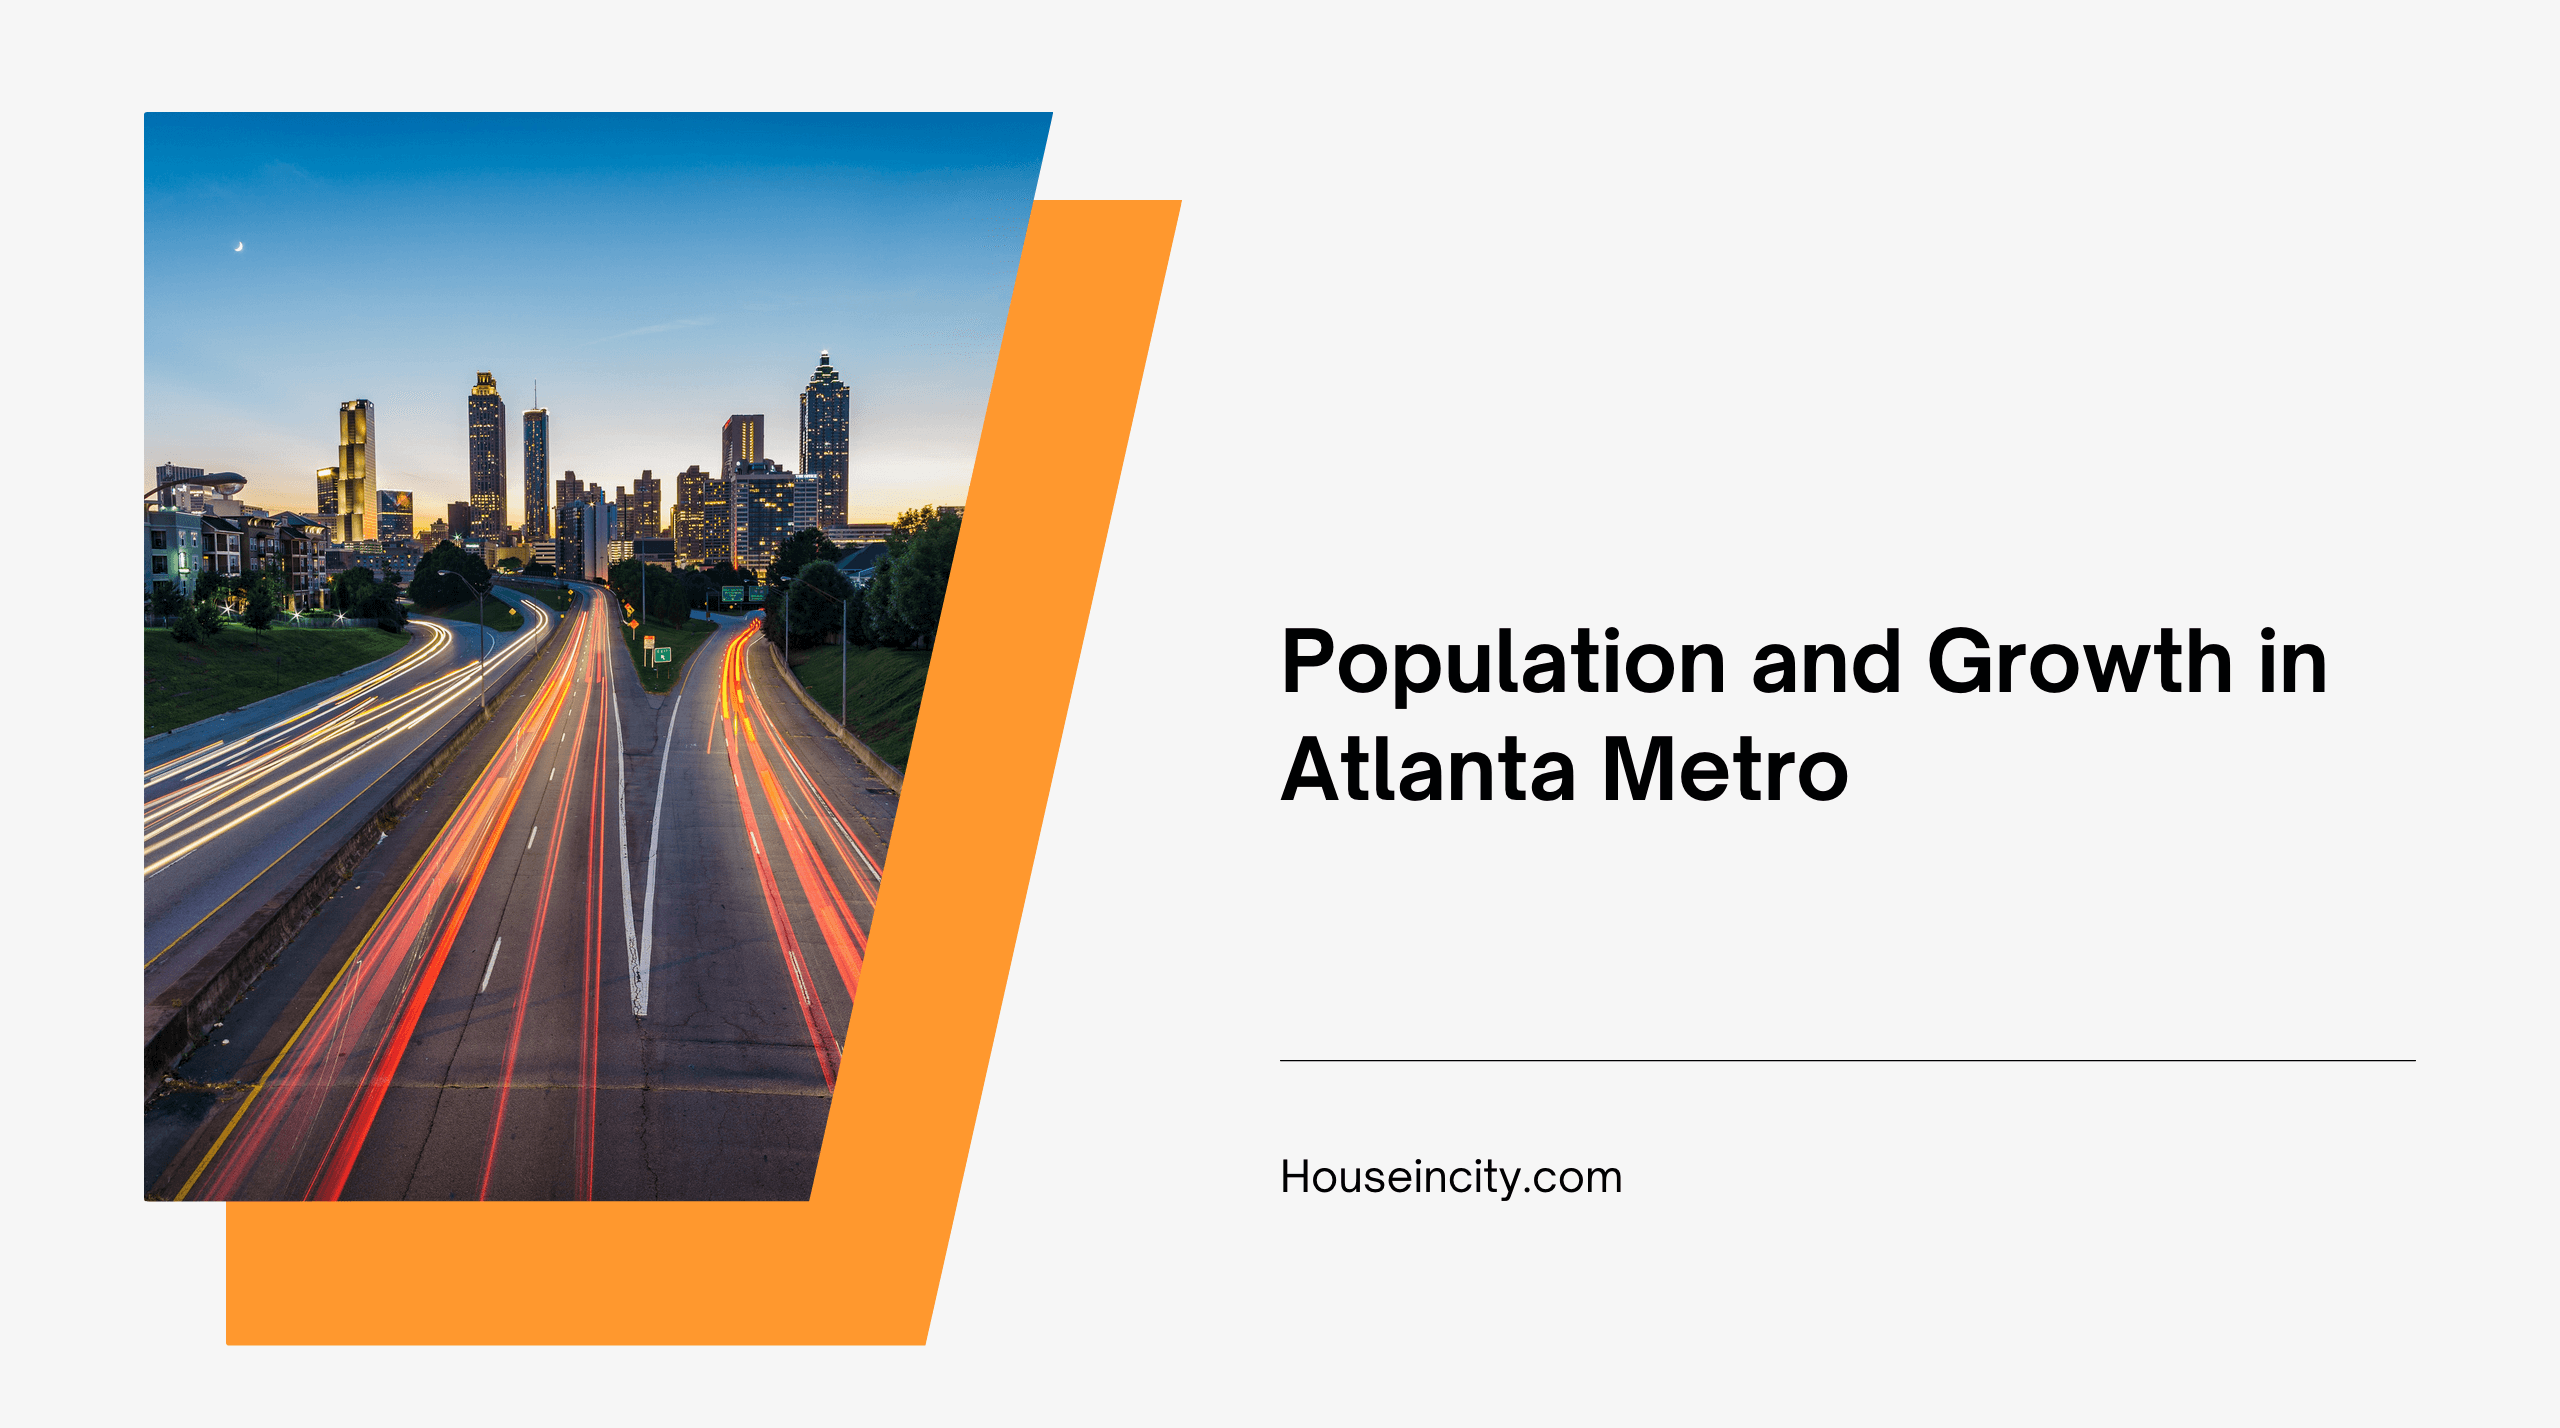 Population and Growth in Atlanta Metro